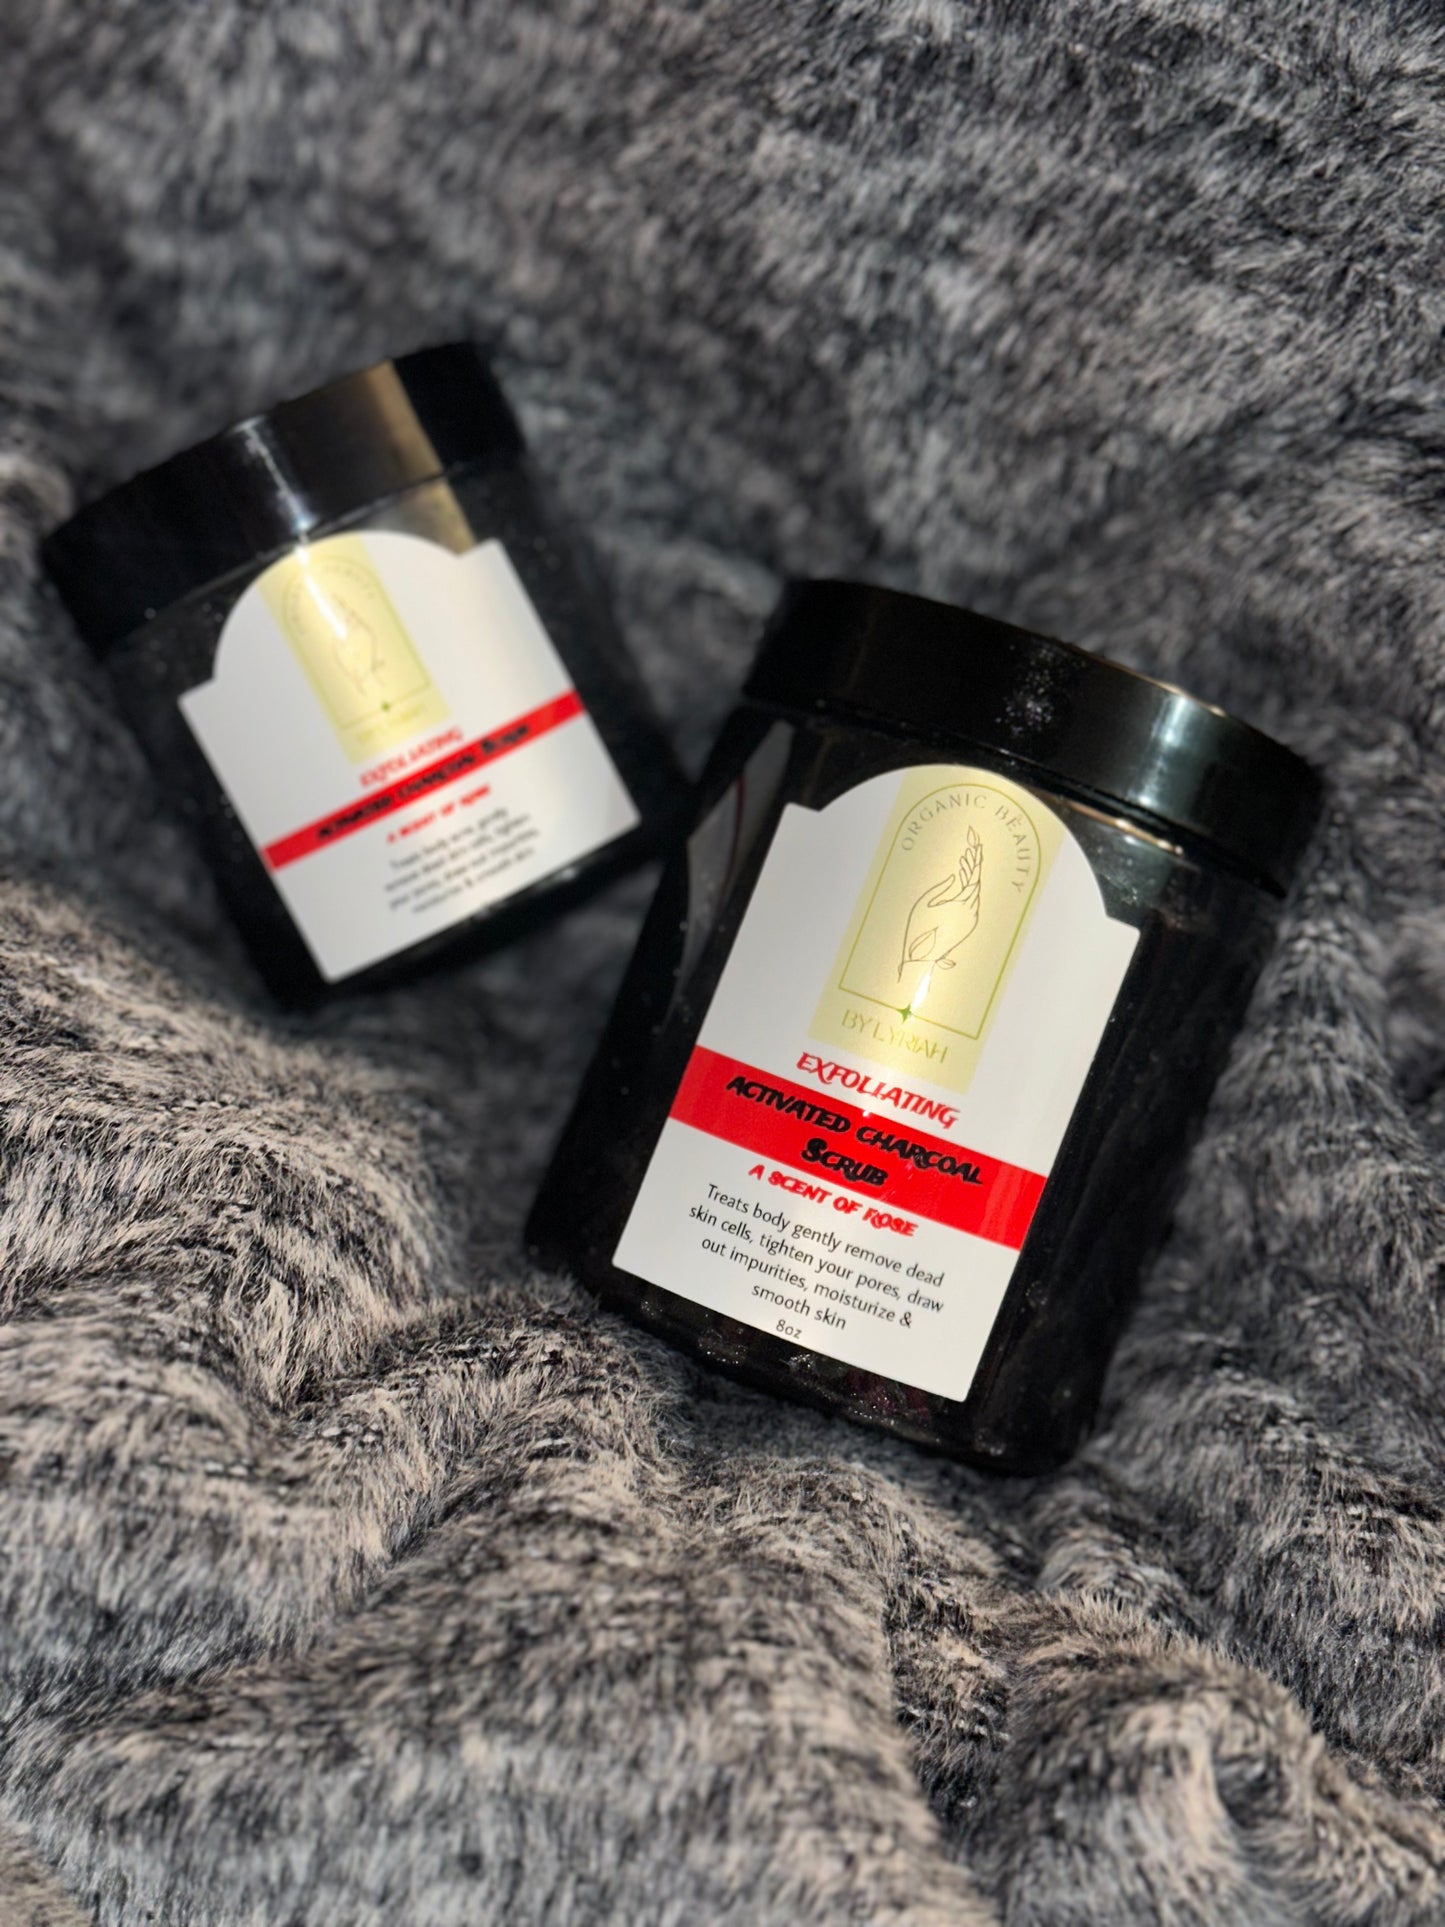 Exfoliating Activated Charcoal